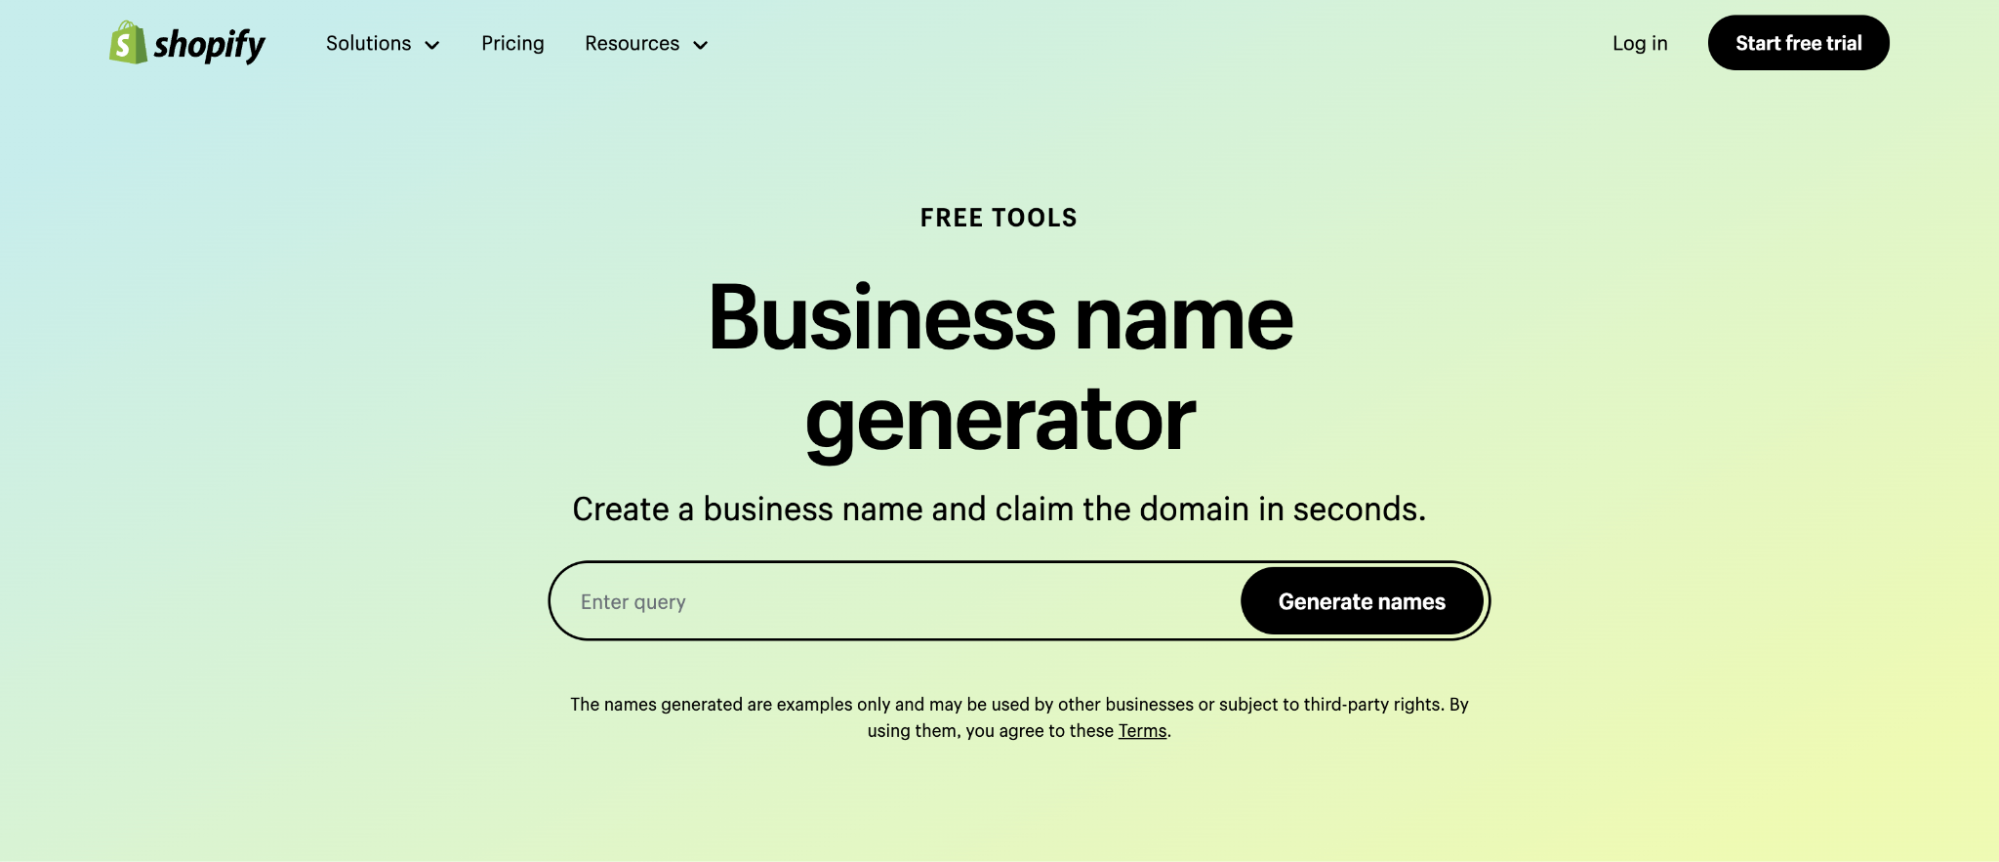 Shopify online store name generator with search bar and button to generate names.